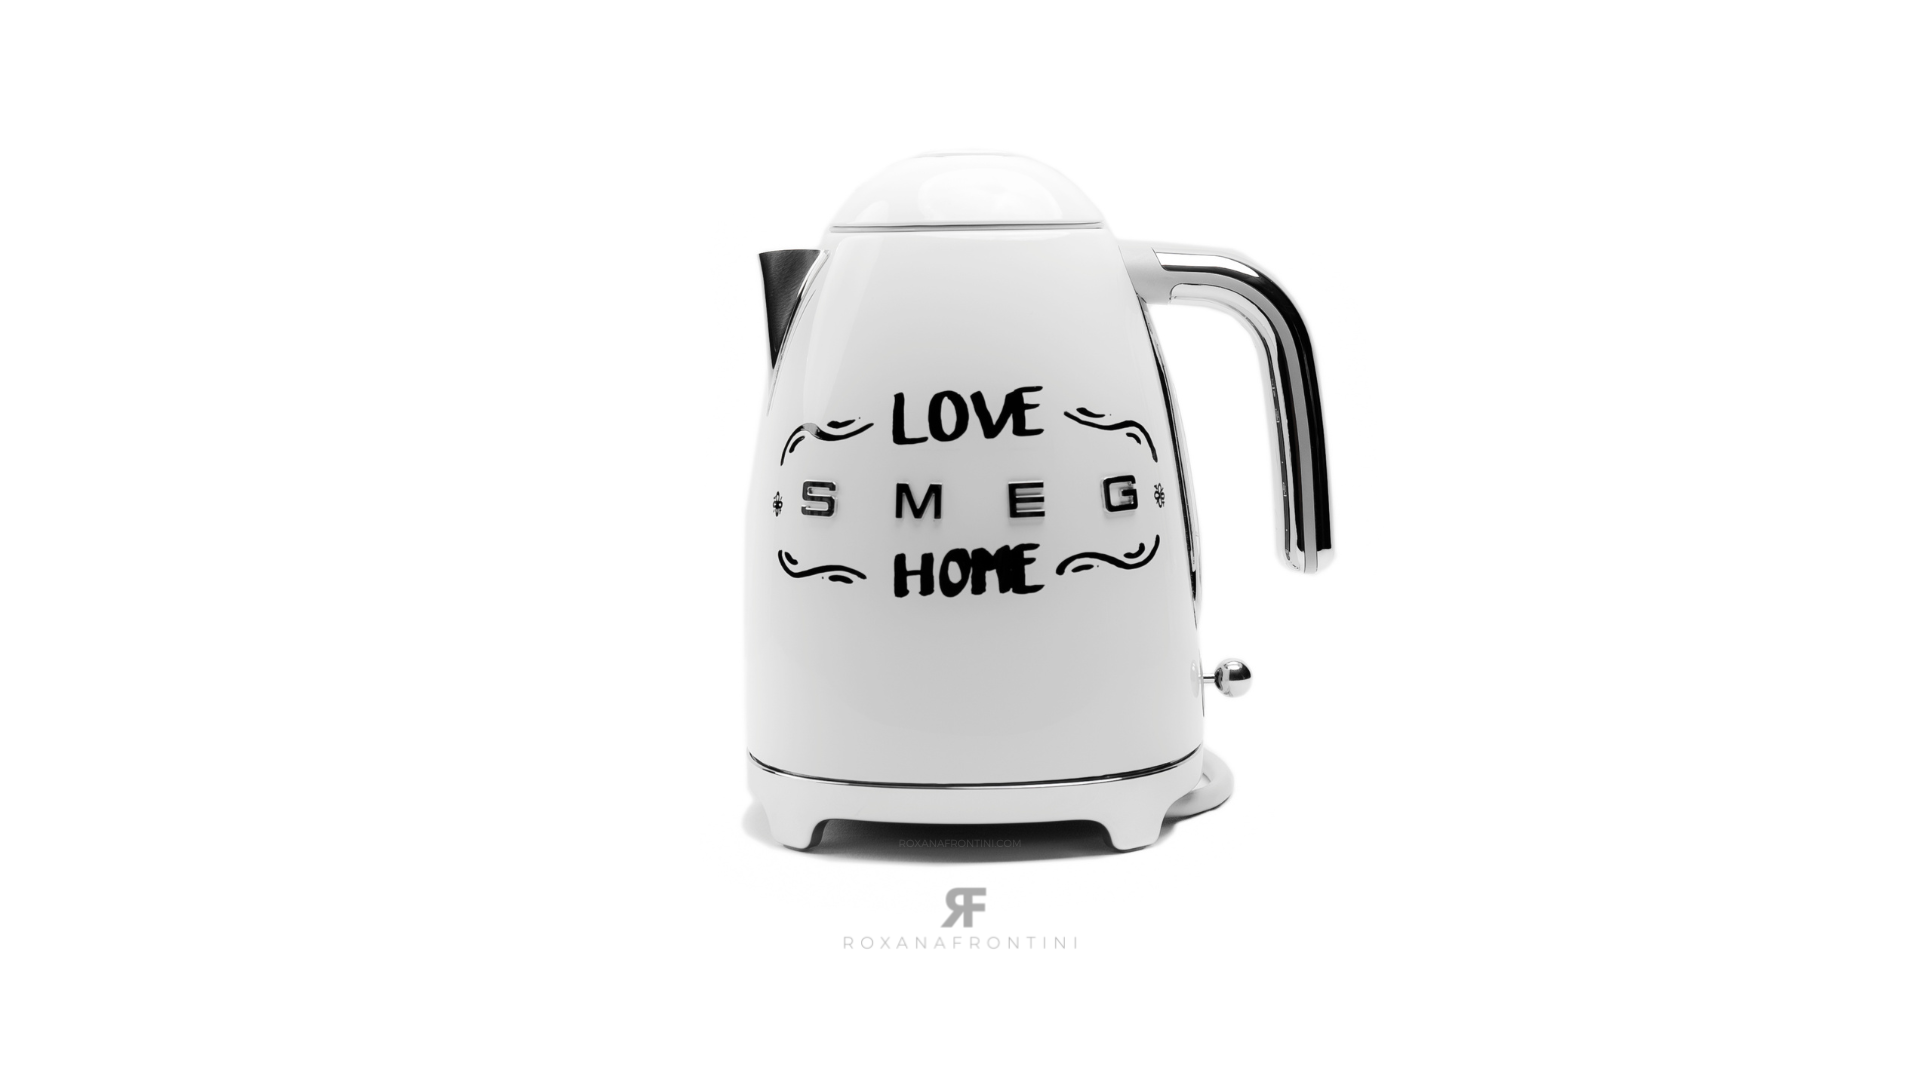 SMEG Black & White Electric Kettle By ROXANA FRONTINI Series LOVE SWEET  HOME